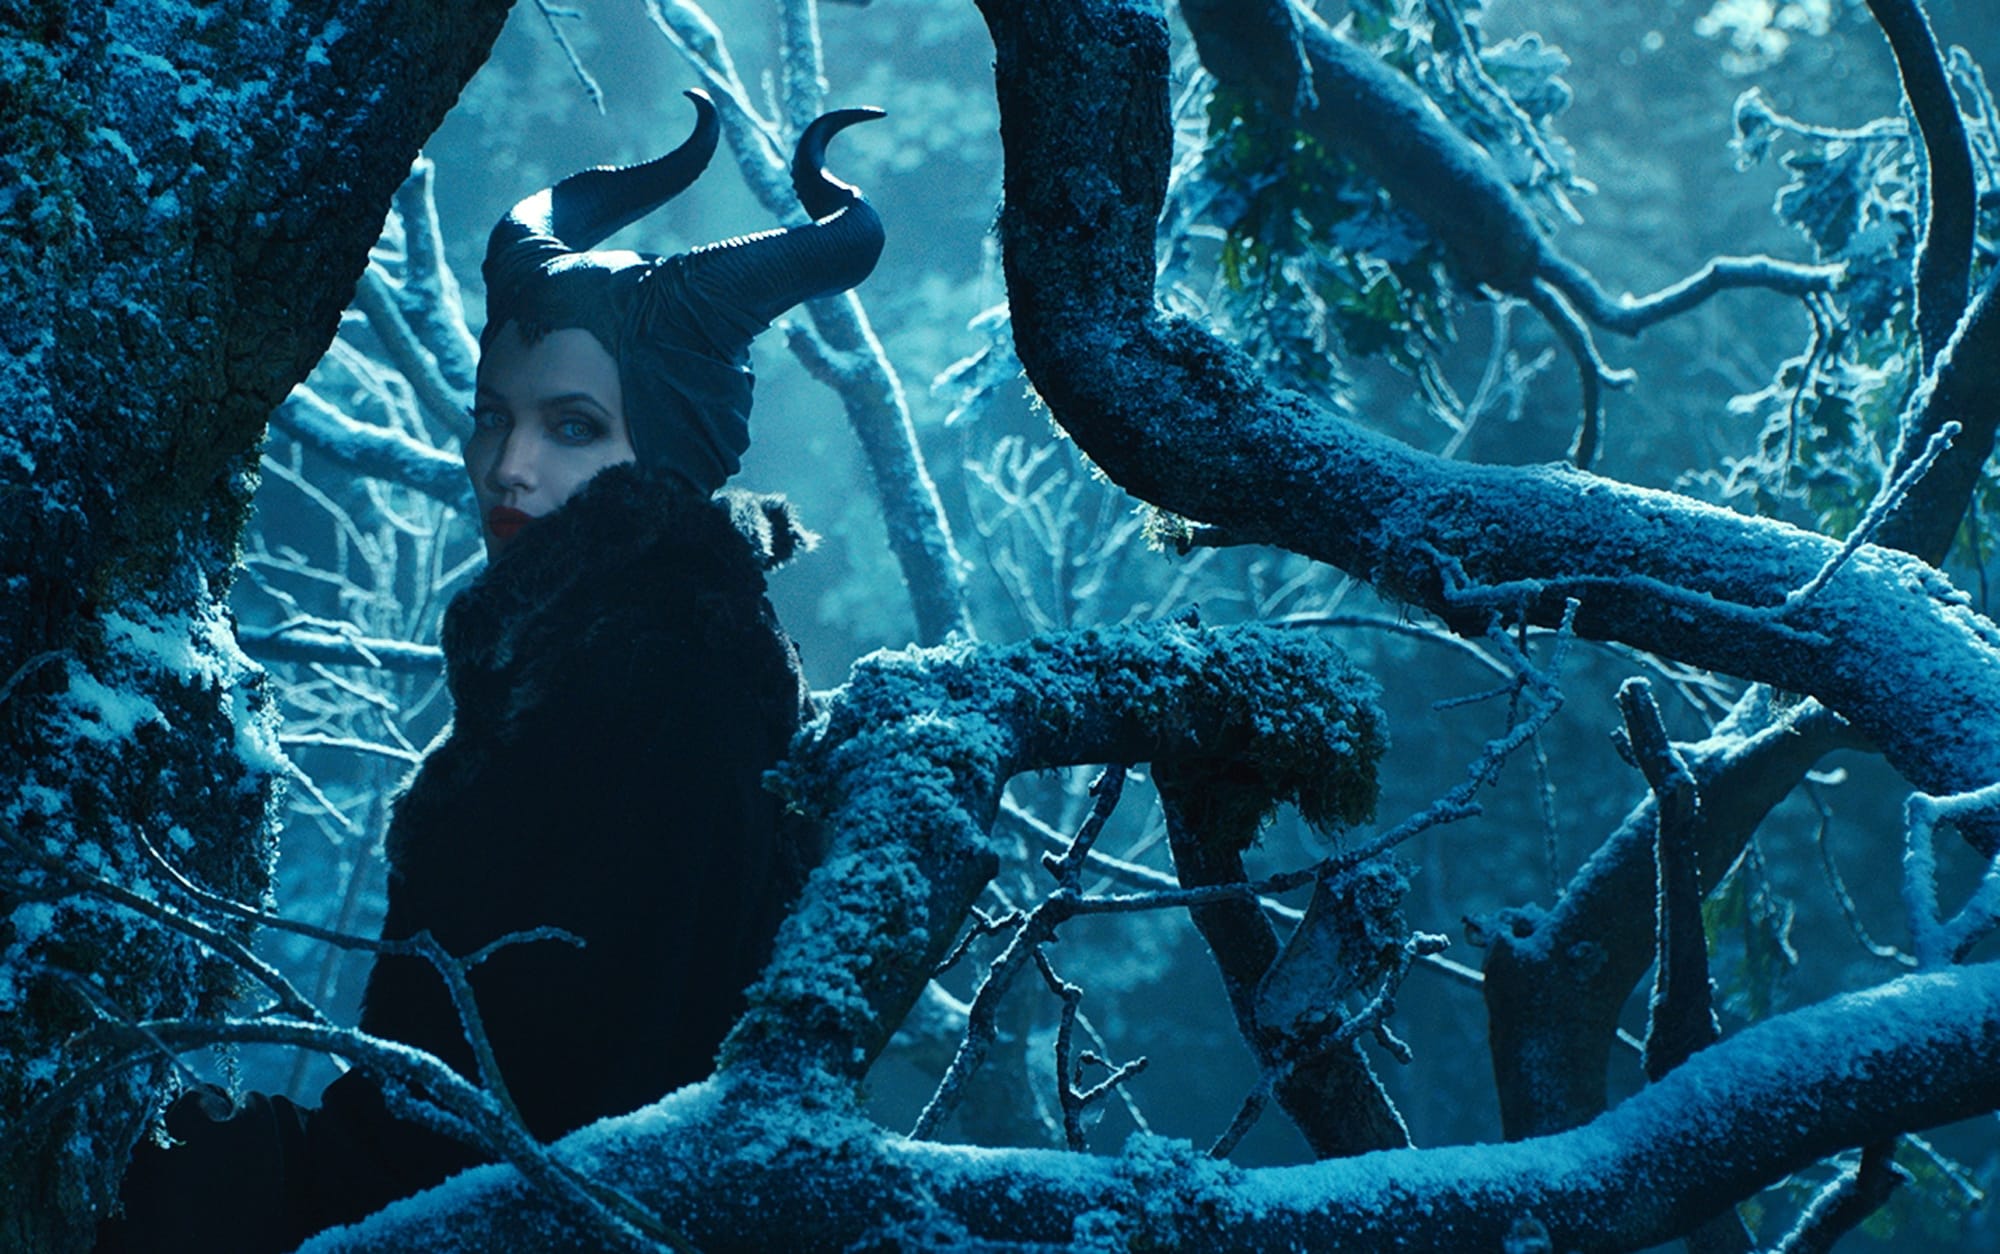 Disney
Angelina Jolie stars in &quot;Maleficent,&quot; in theaters May 30.